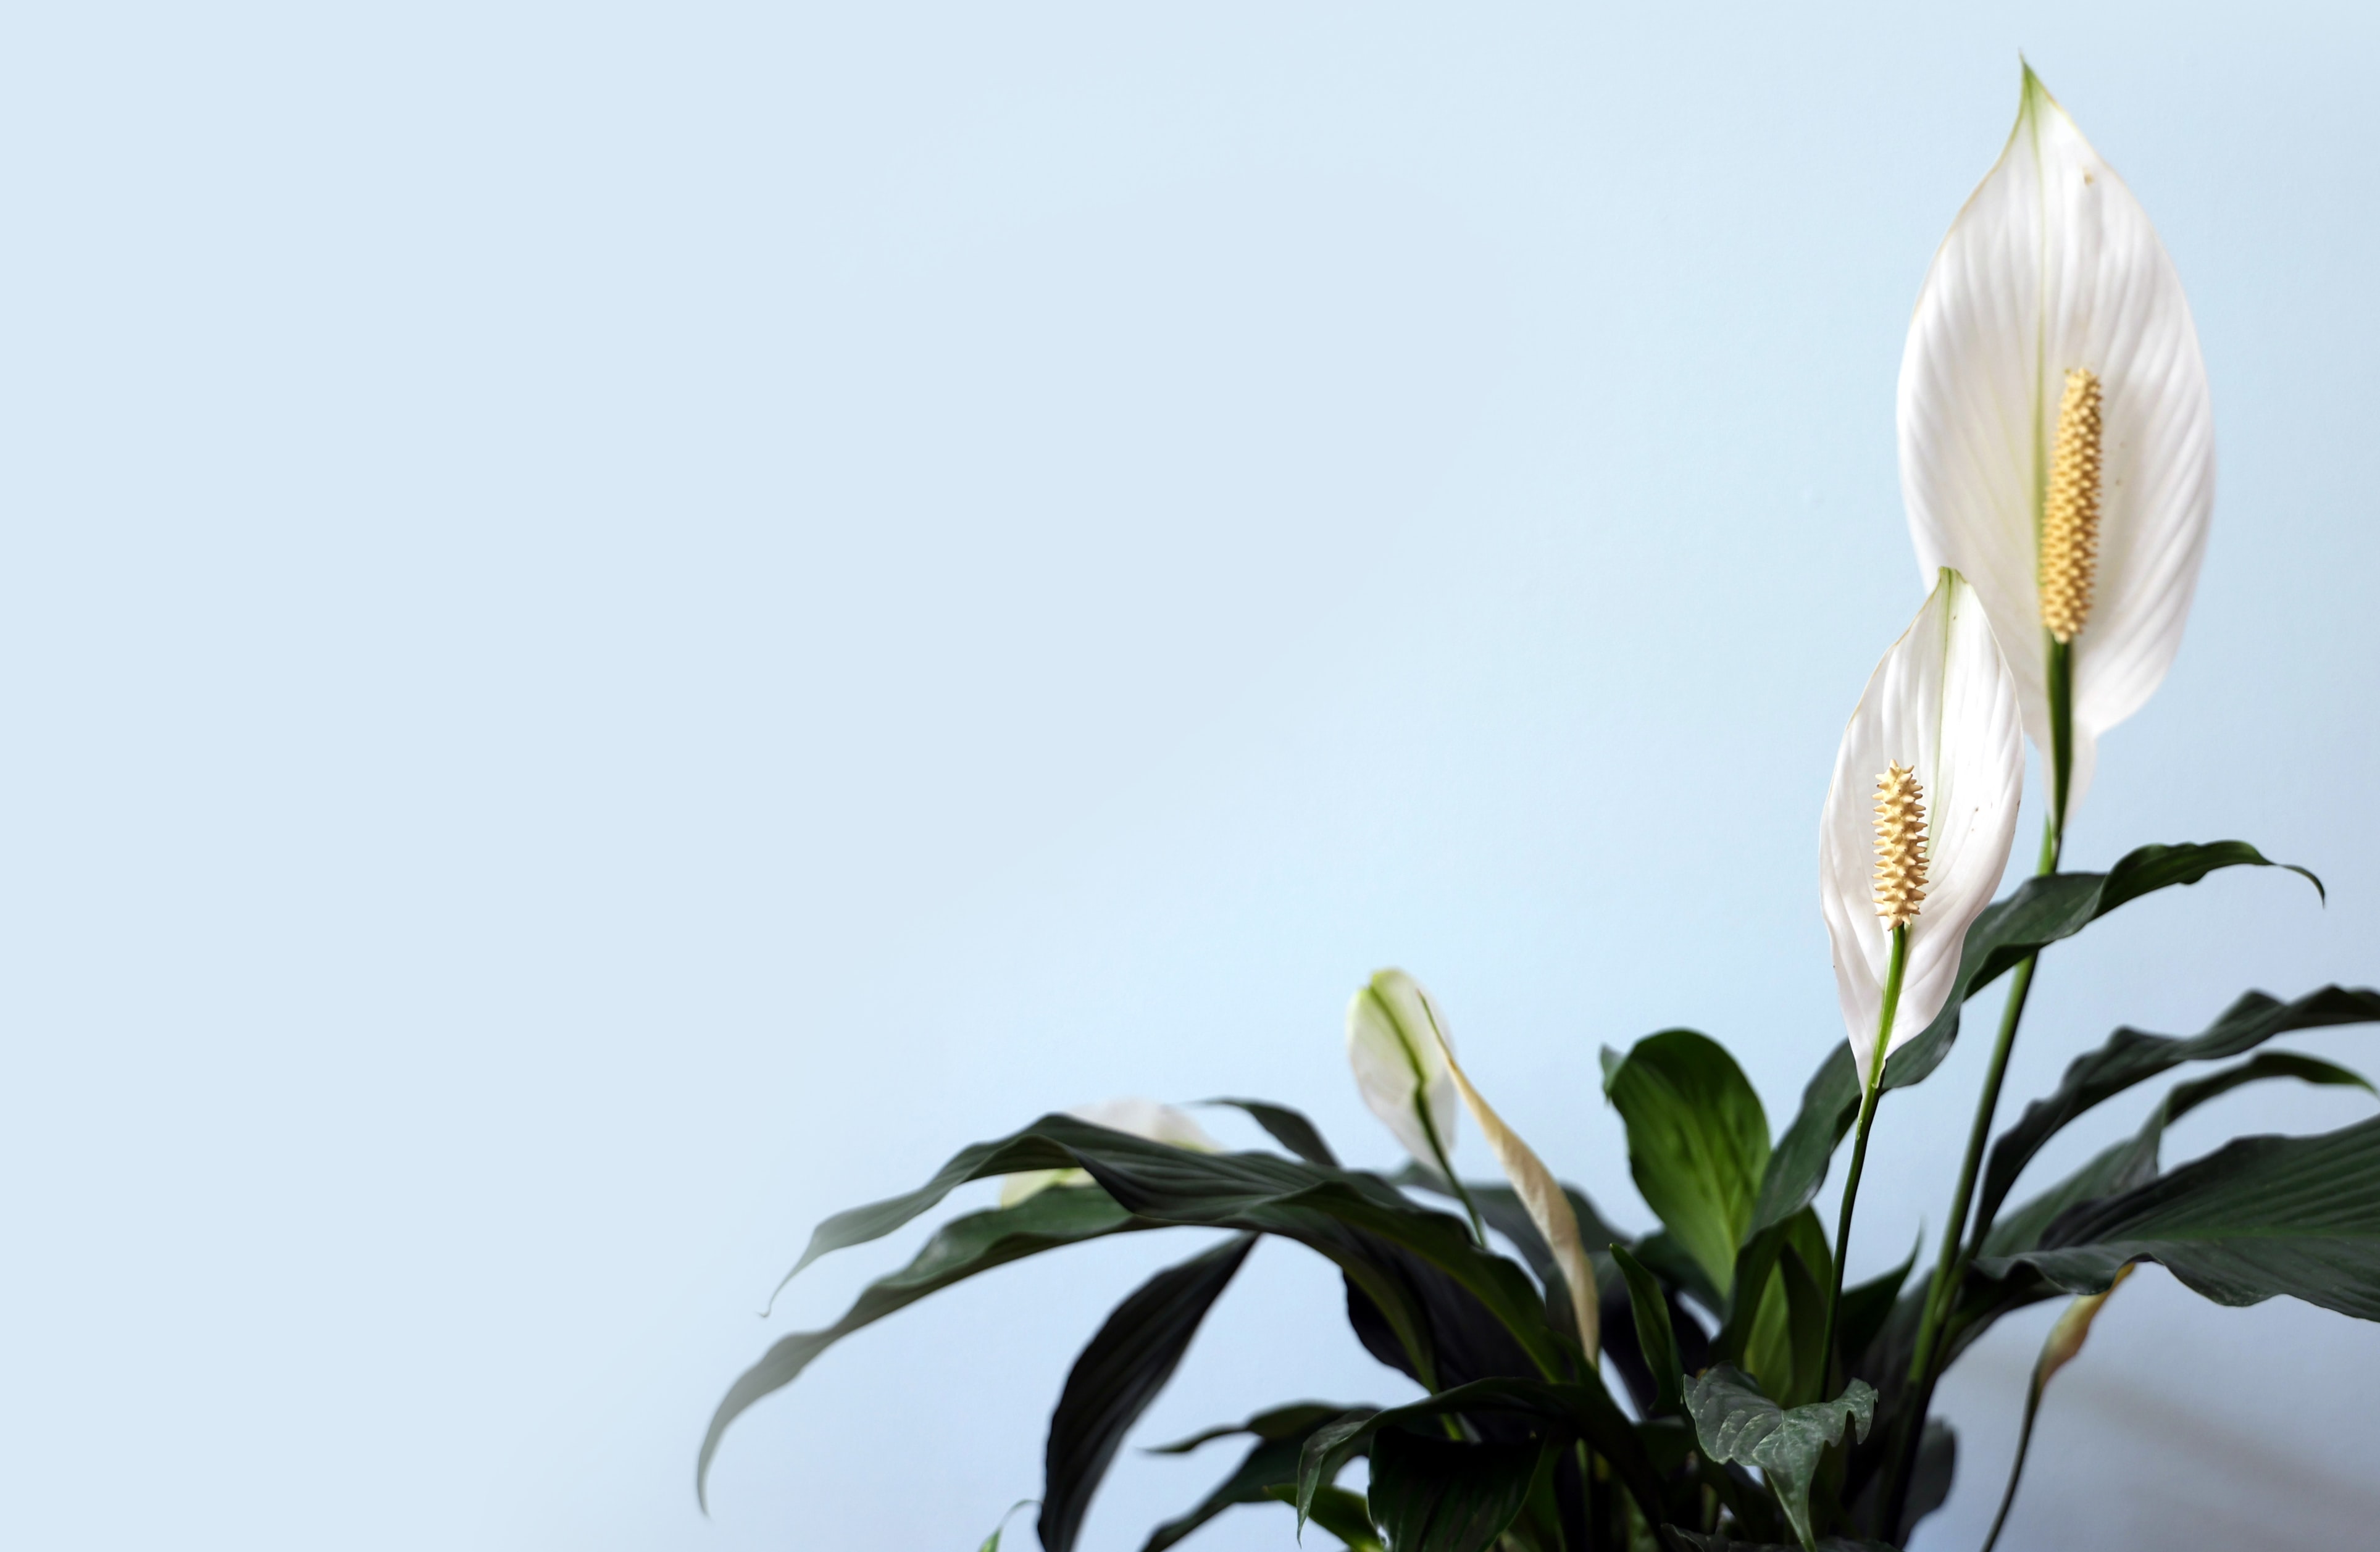 Peace Lily (Photo by Bellava G on Unsplash)